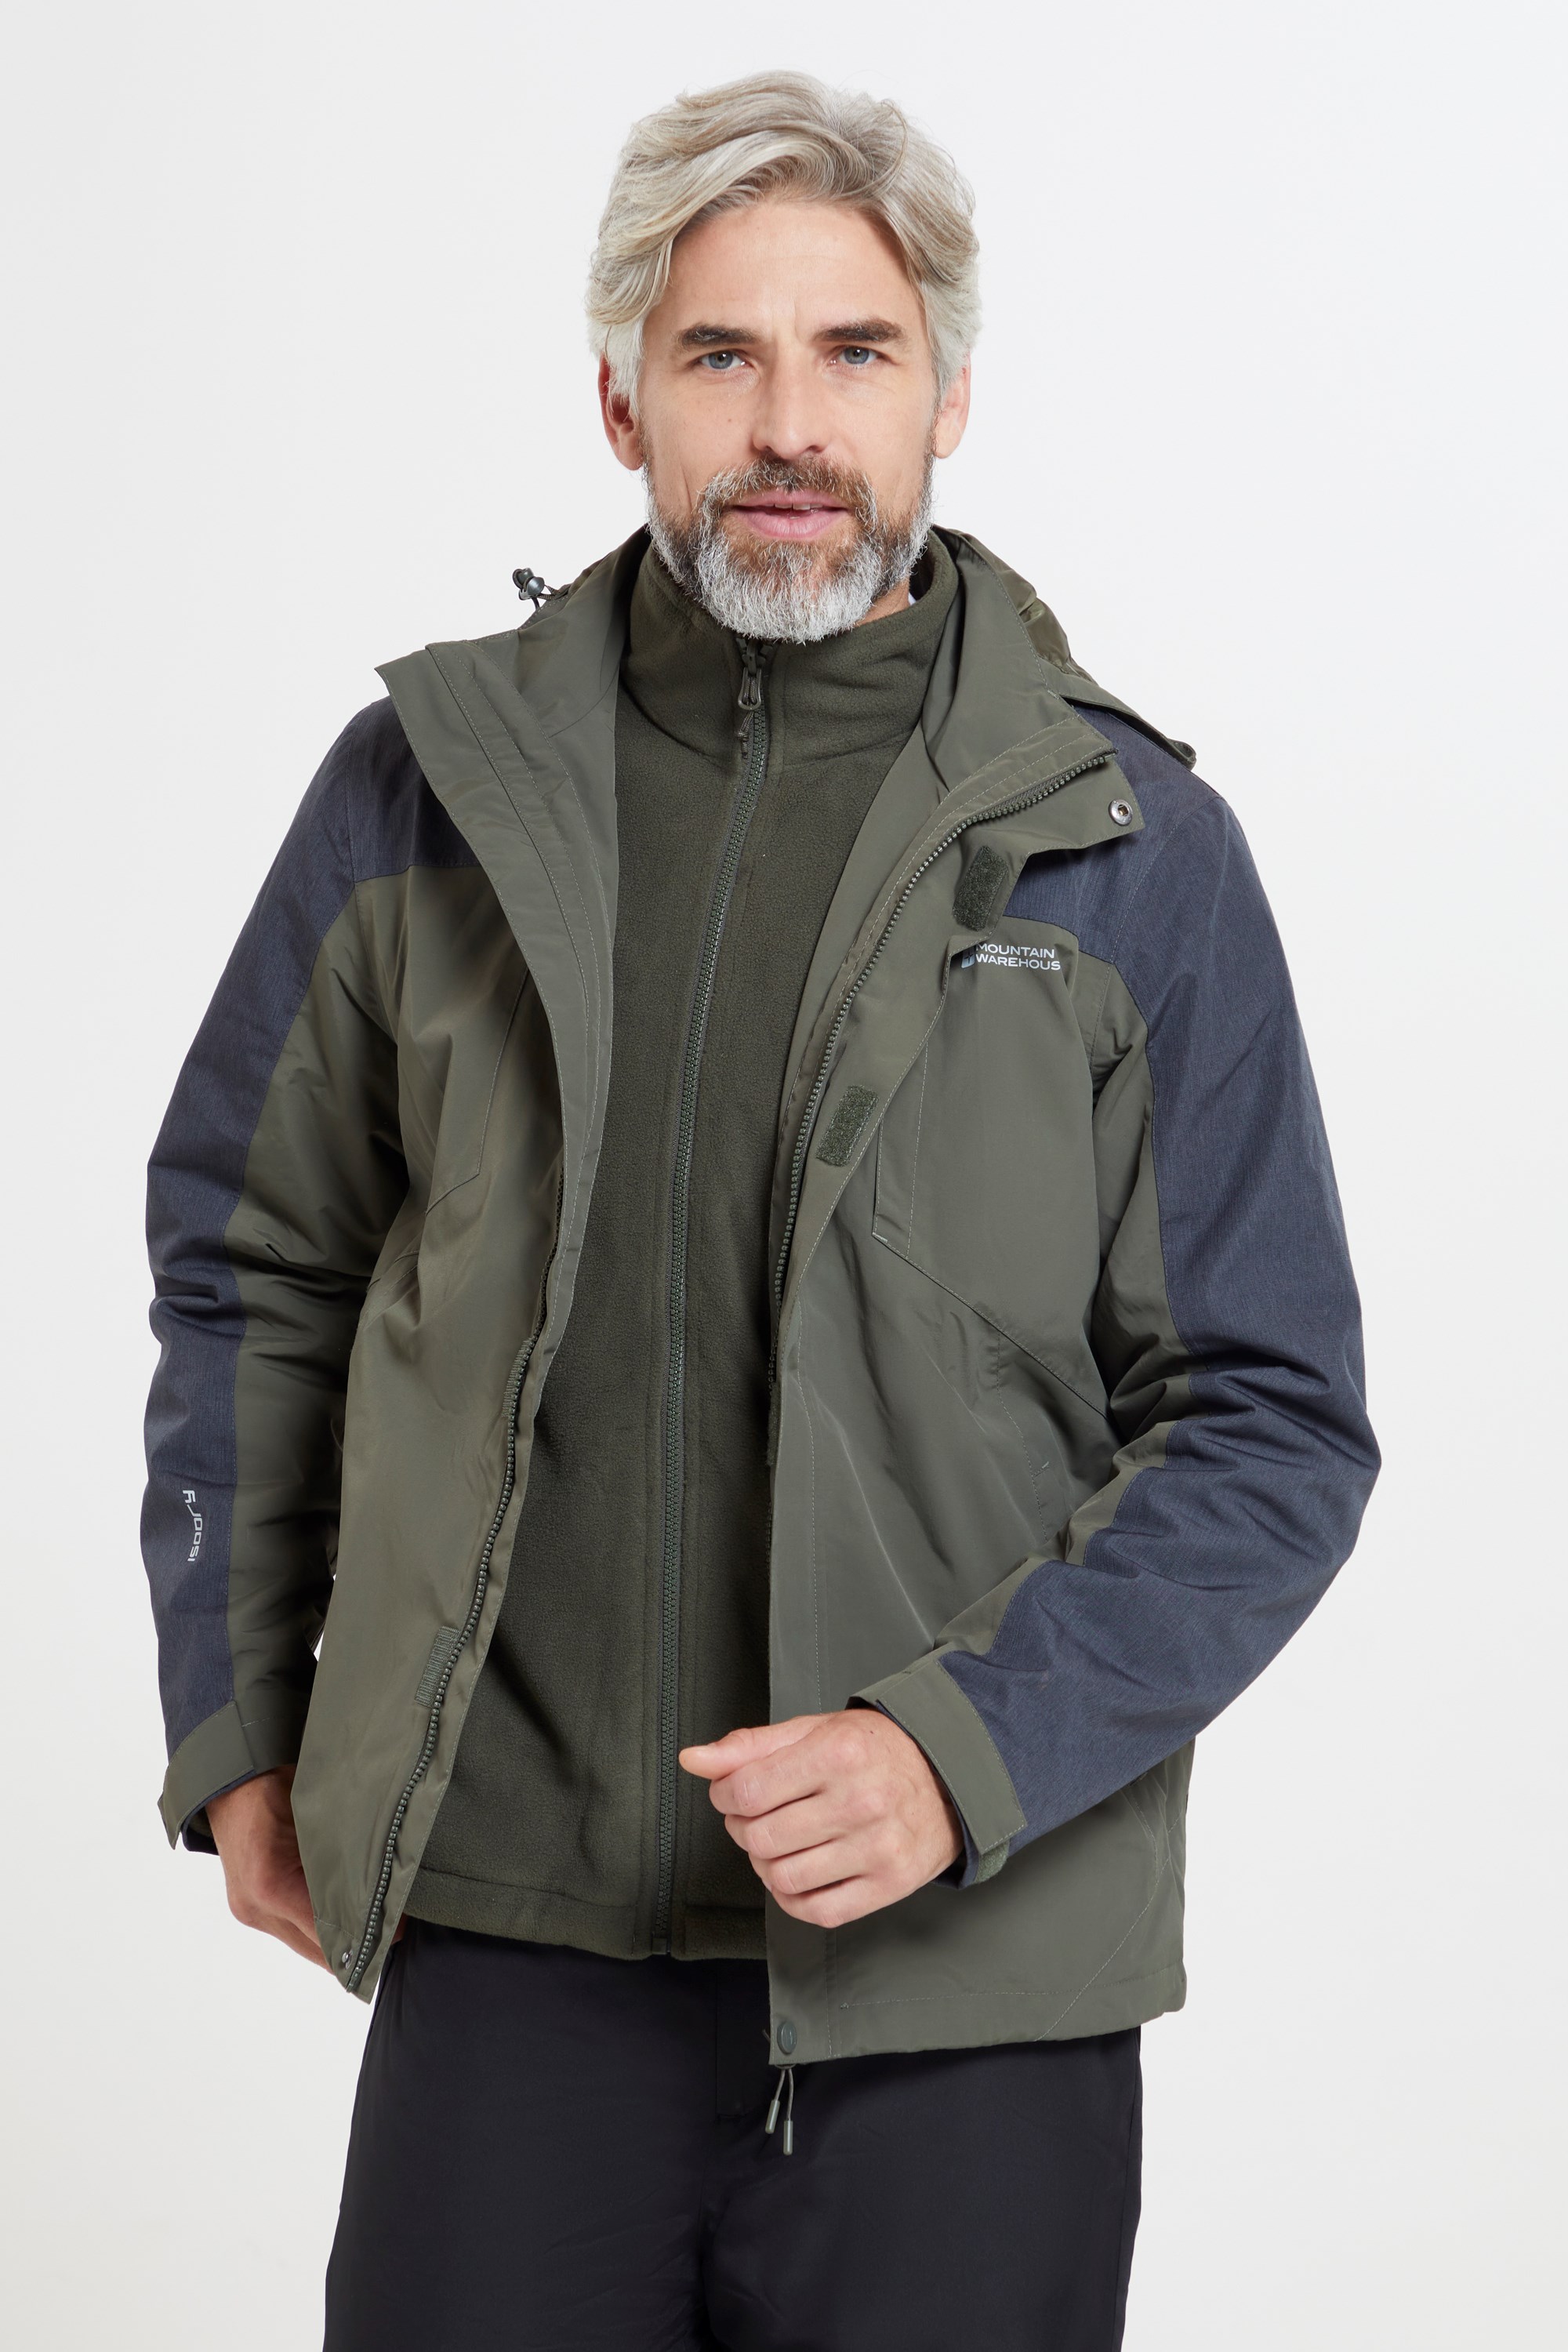 District Extreme Mens 3 in 1 Waterproof Jacket | Mountain Warehouse NZ